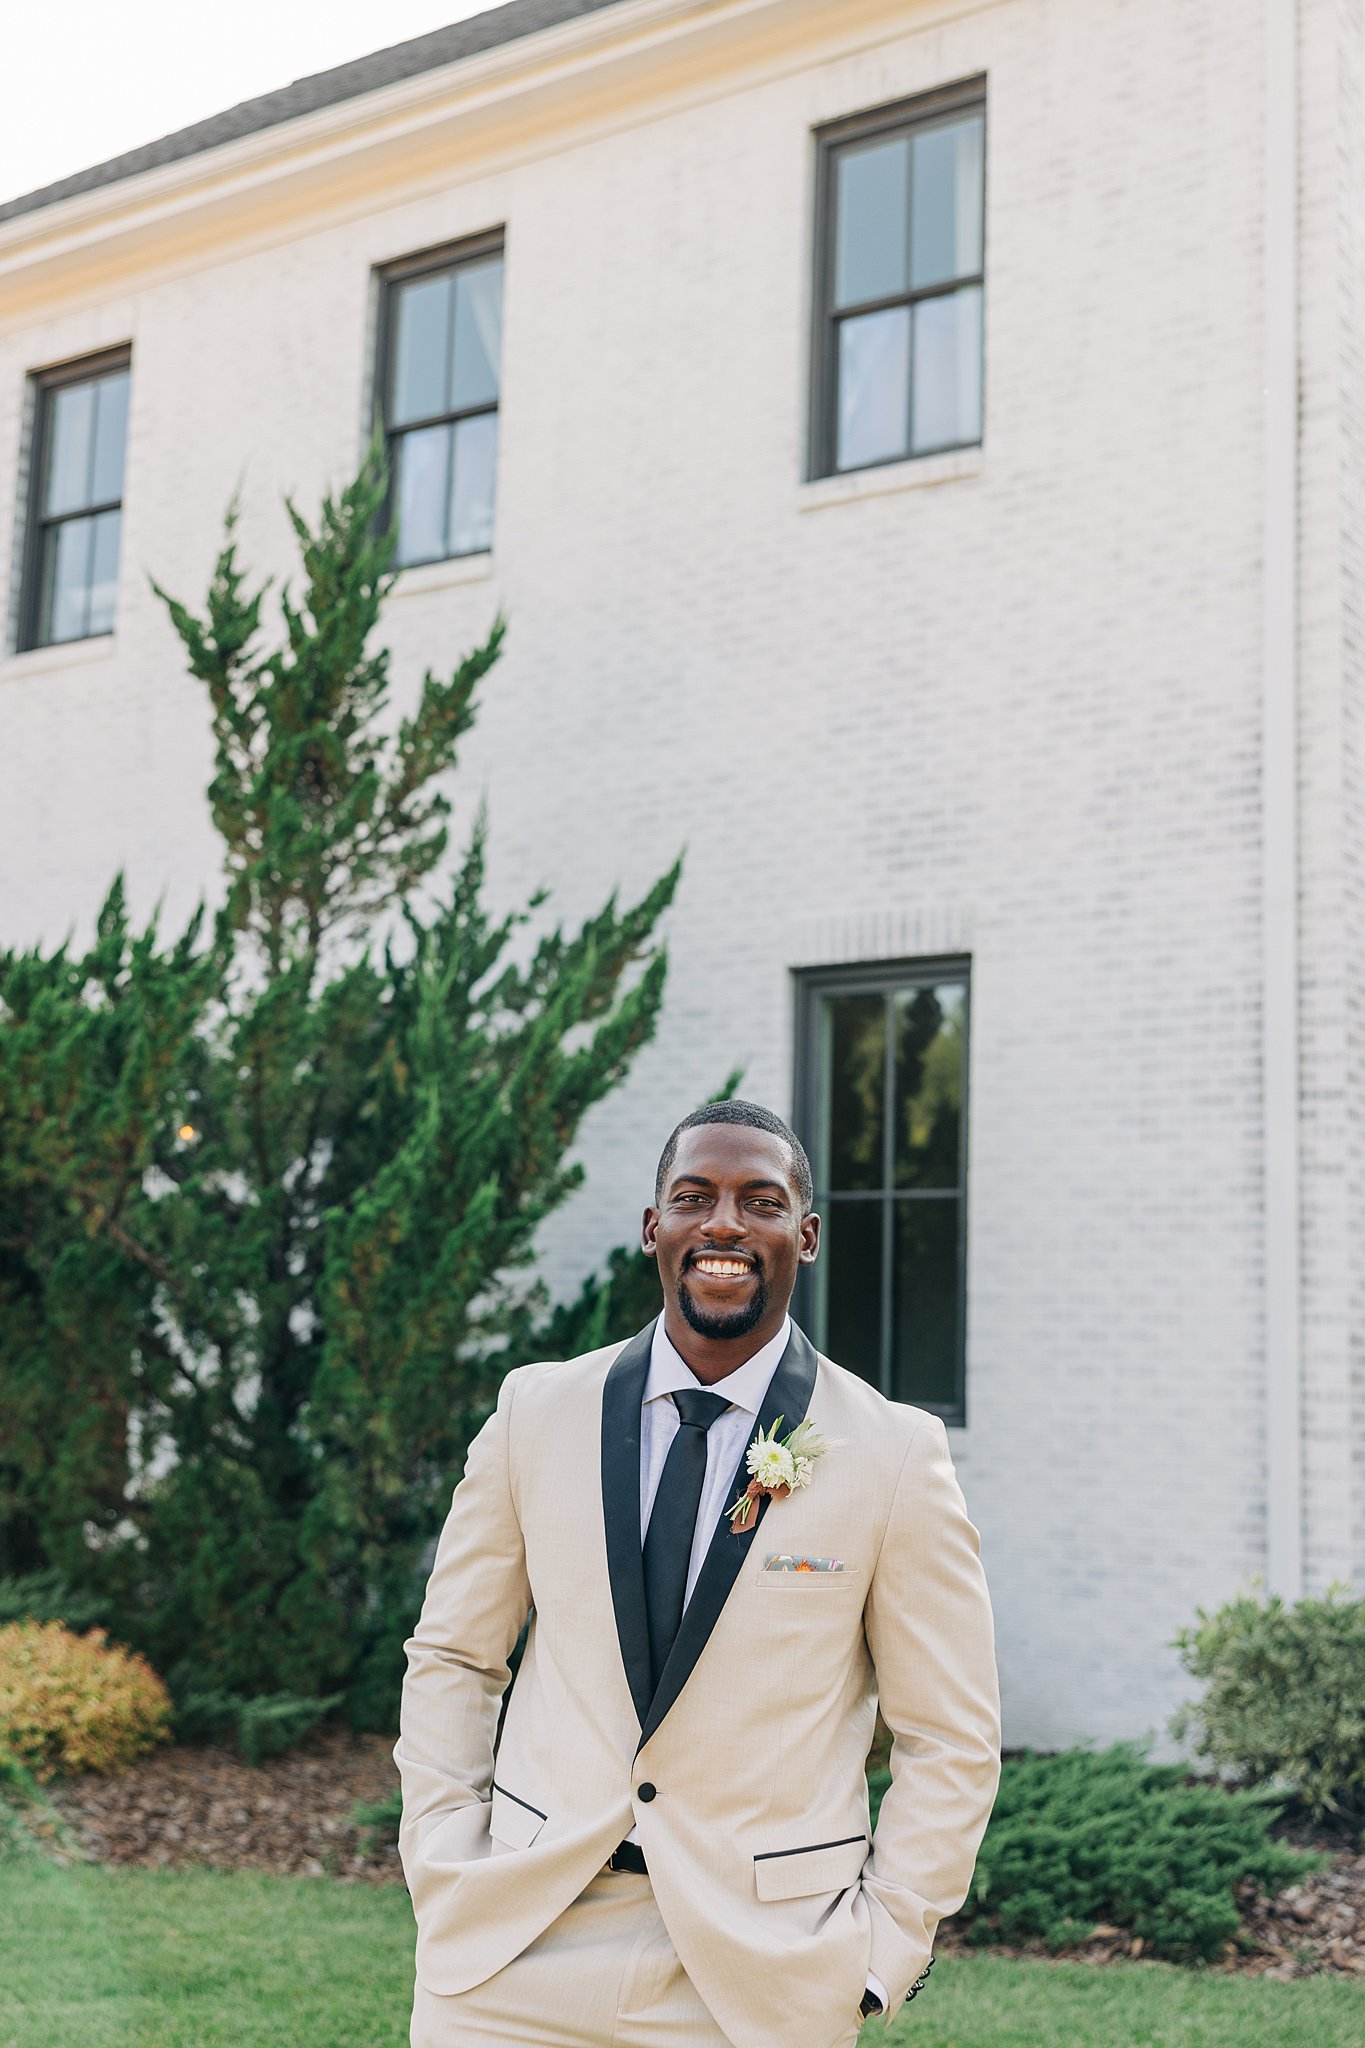 A groom in a cream and black suit stands in a back garden smiling with hands in pockets